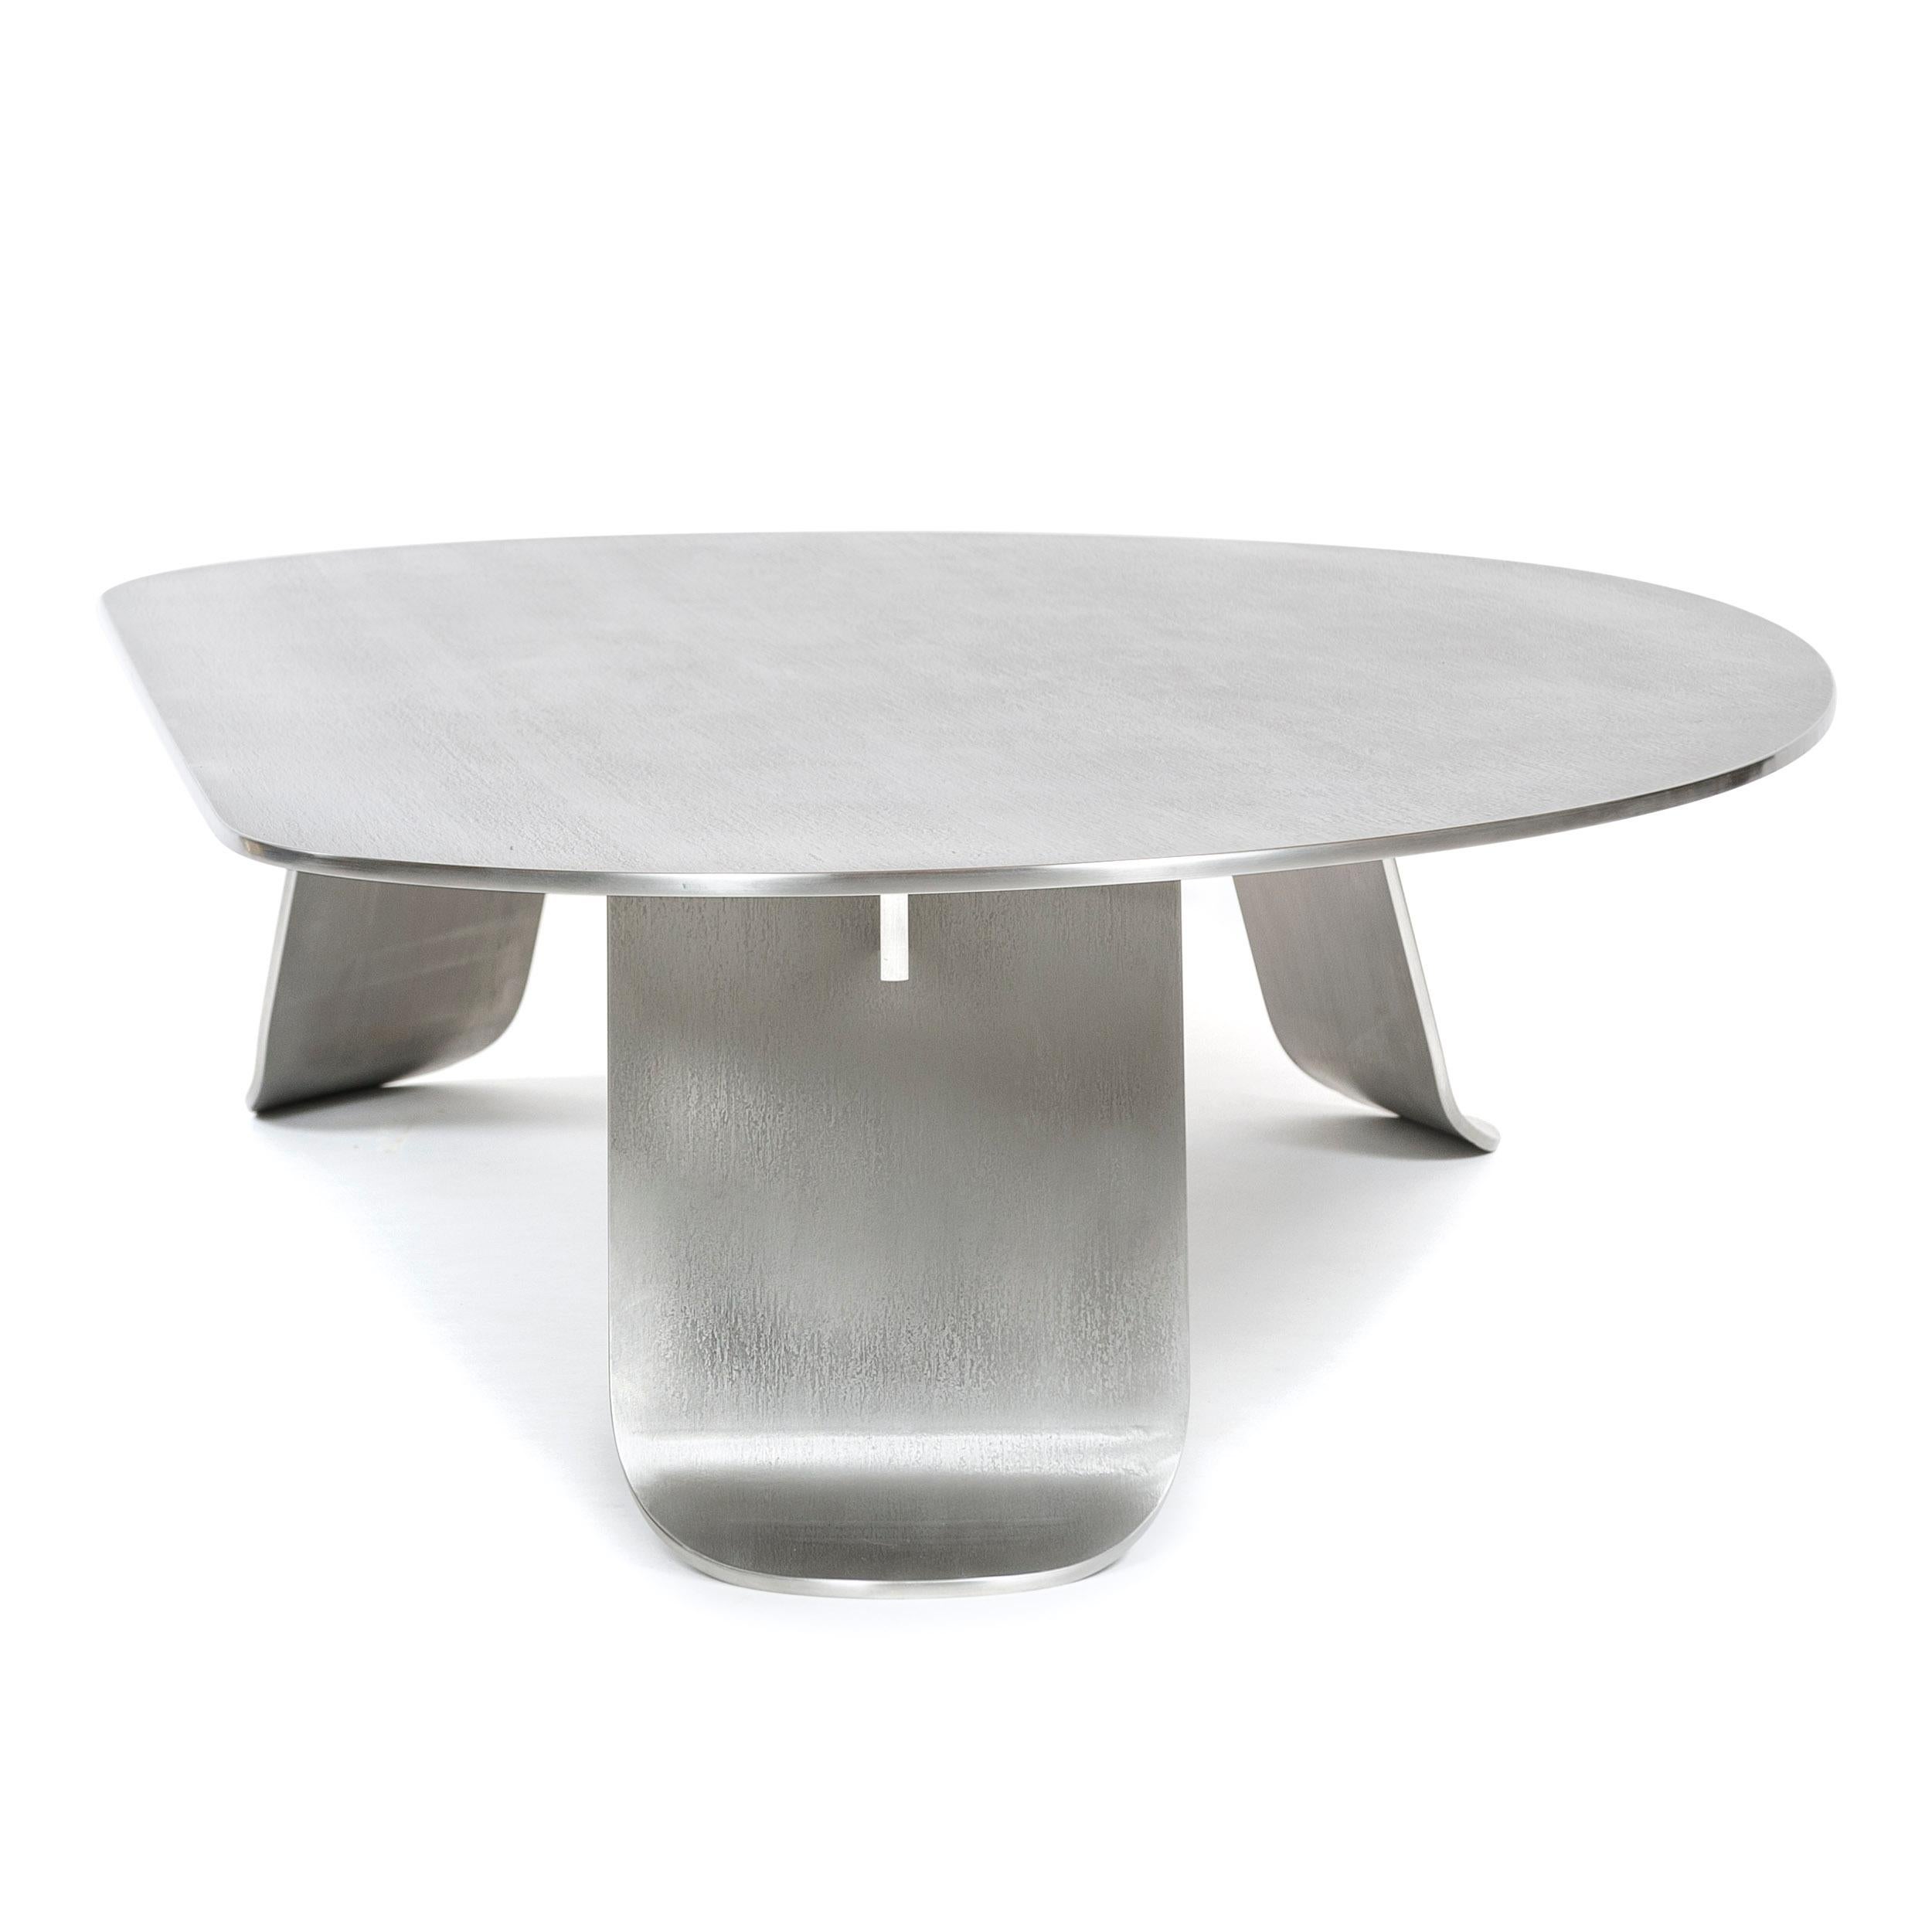 WYETH Chrysalis Table No. 1 in Natural Grain Stainless Steel For Sale 4